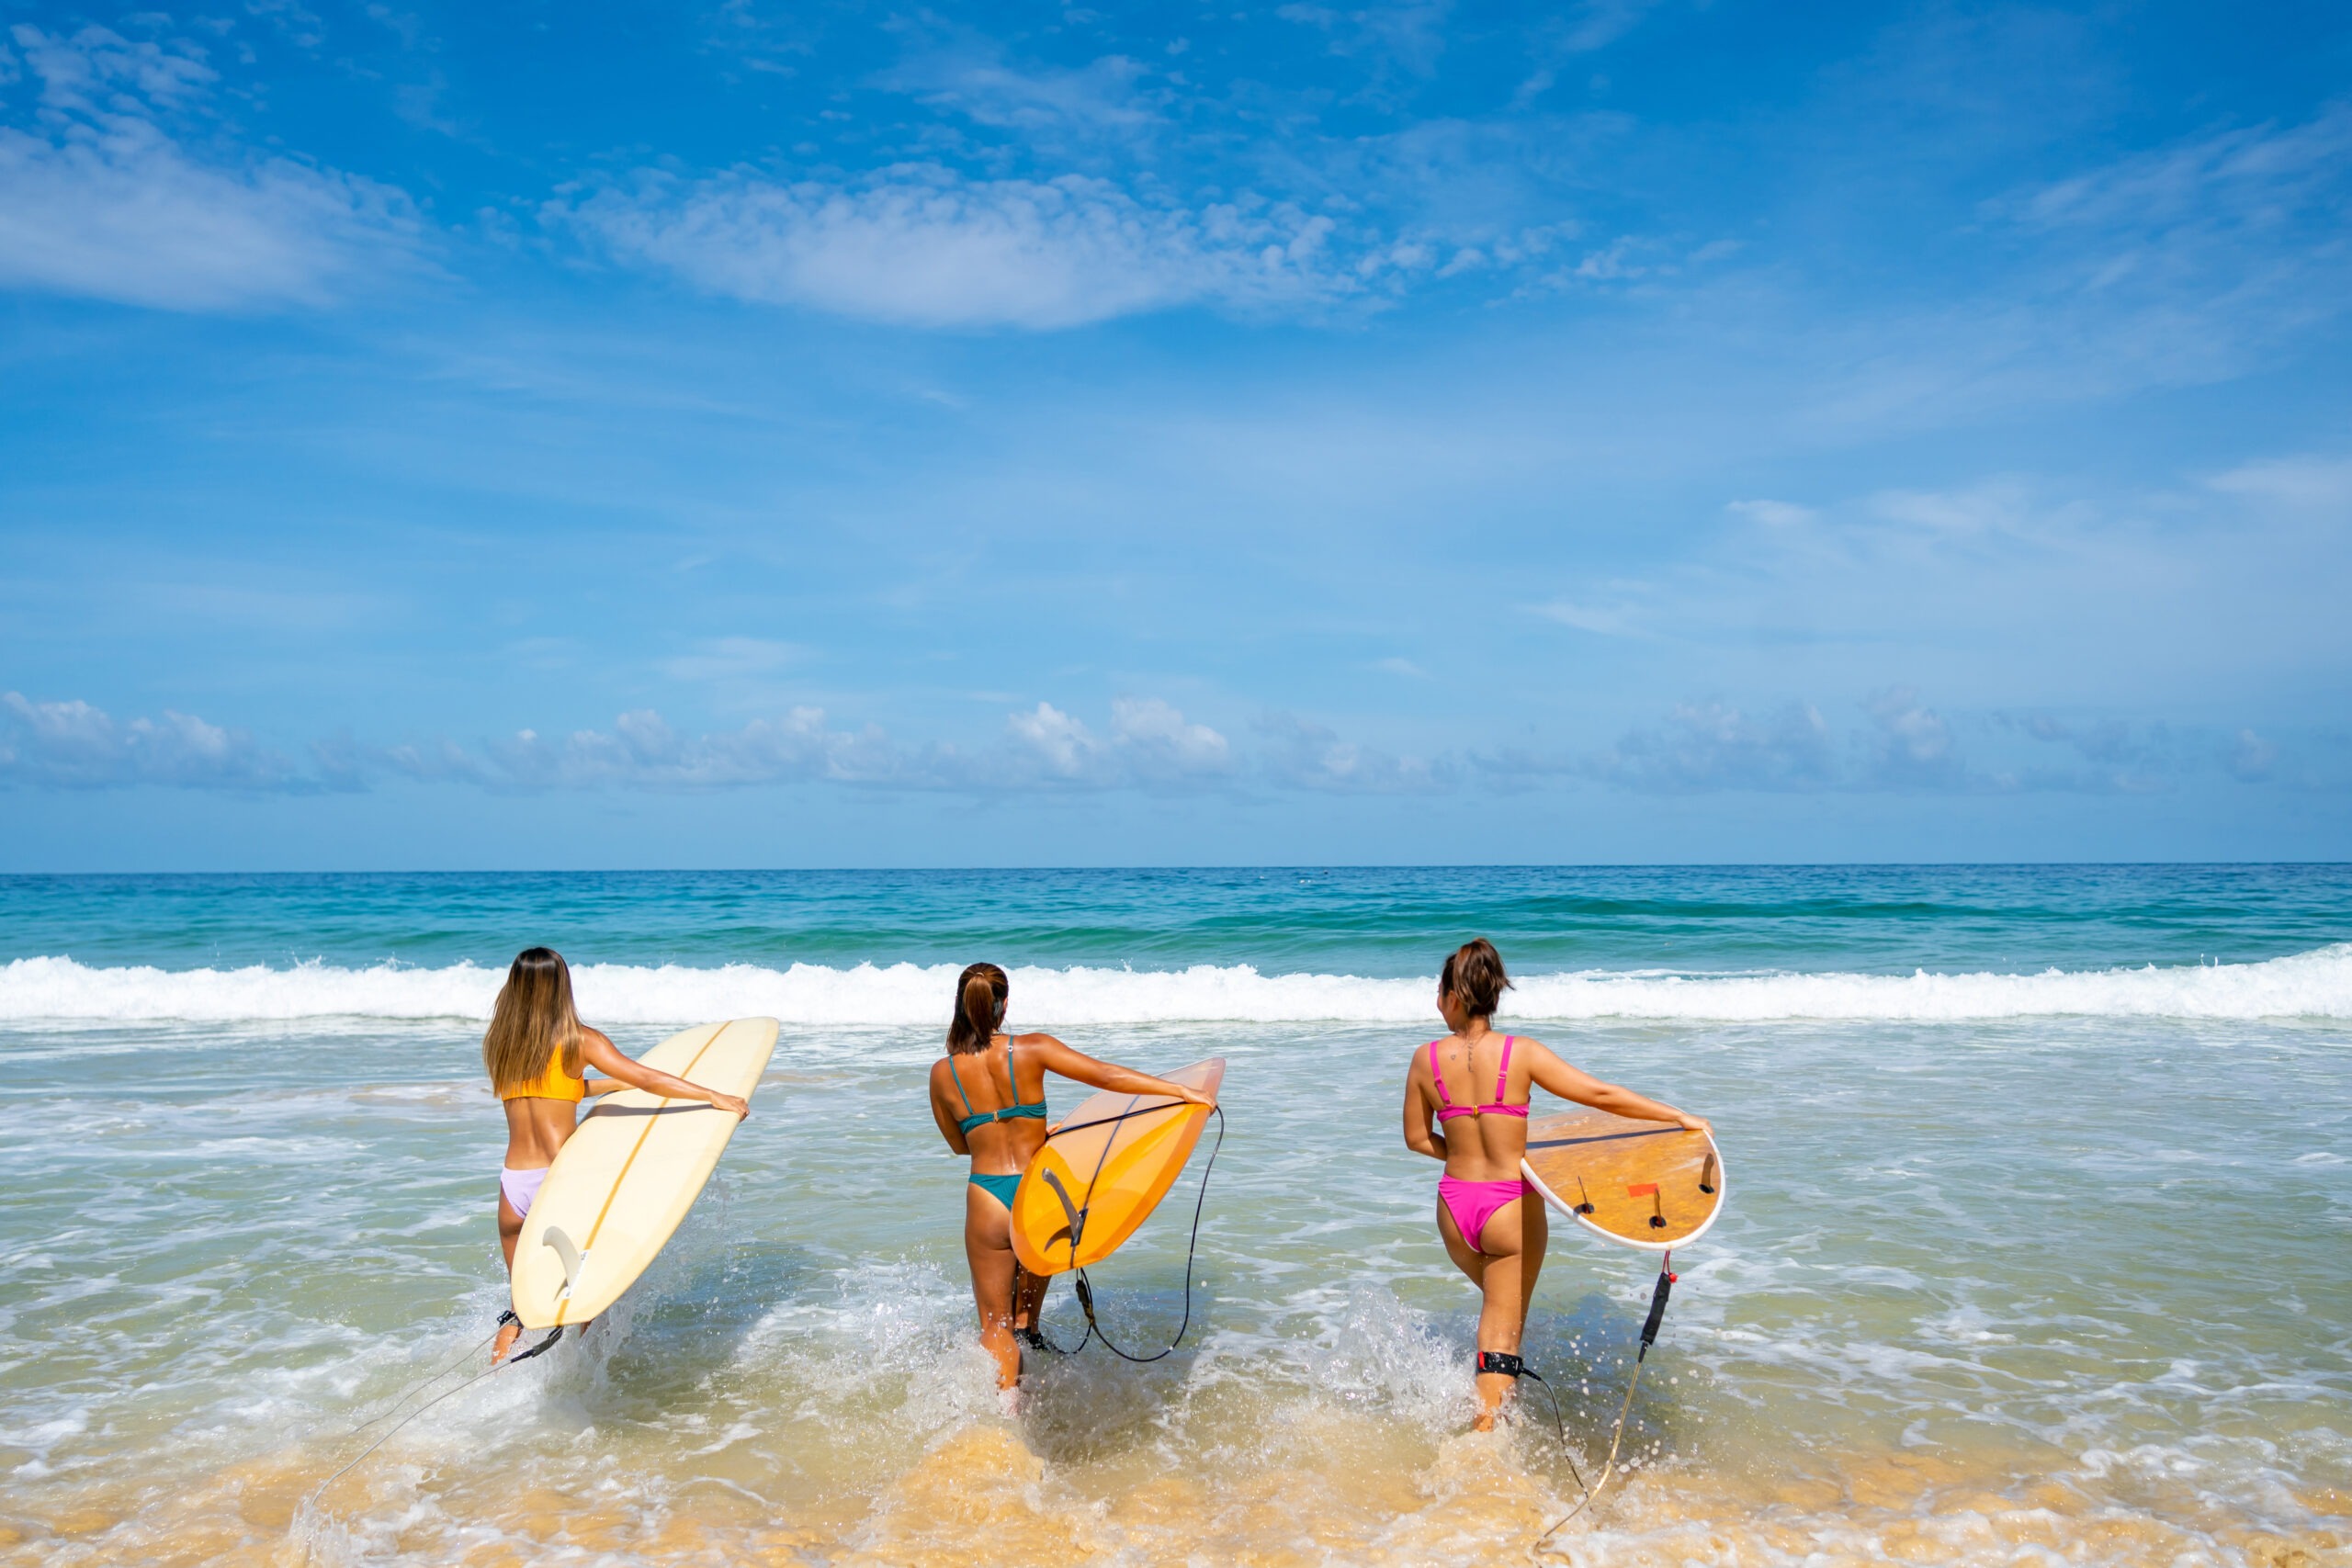 group-of-asian-woman-holding-surfboard-walking-together-on-the-beach-in-sunny-day